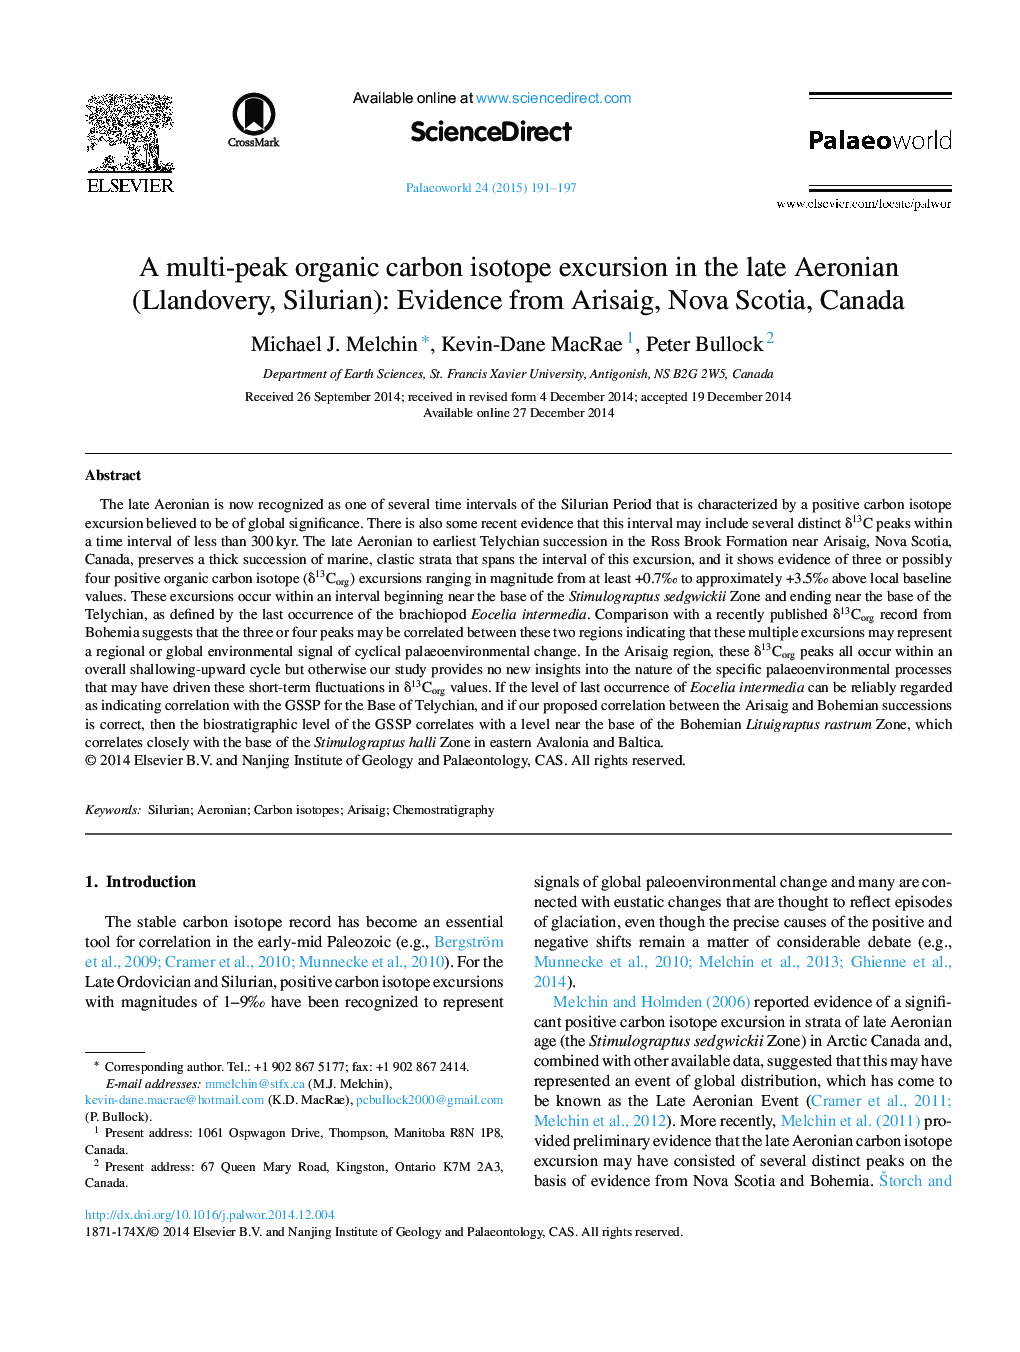 A multi-peak organic carbon isotope excursion in the late Aeronian (Llandovery, Silurian): Evidence from Arisaig, Nova Scotia, Canada